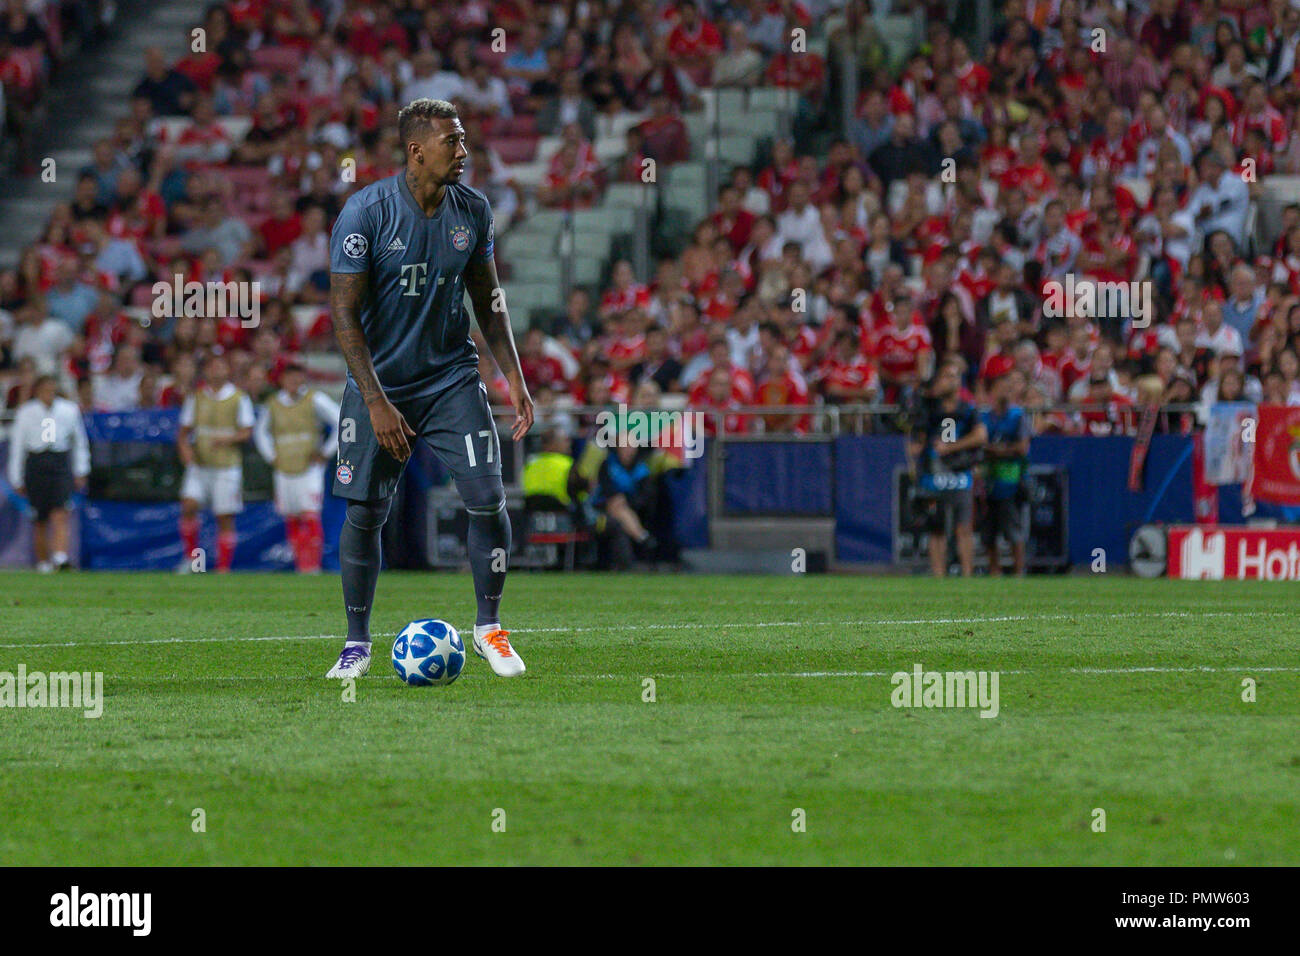 Lisbon, Portugal. 19th Sept 2018. Bayern Munchen's defender from Germany Jerome Boateng (17) in action during the game of the 1st round of Group E for the UEFA Champions League, SL Benfica vs Bayern Munchen © Alexandre de Sousa/Alamy Live News Stock Photo